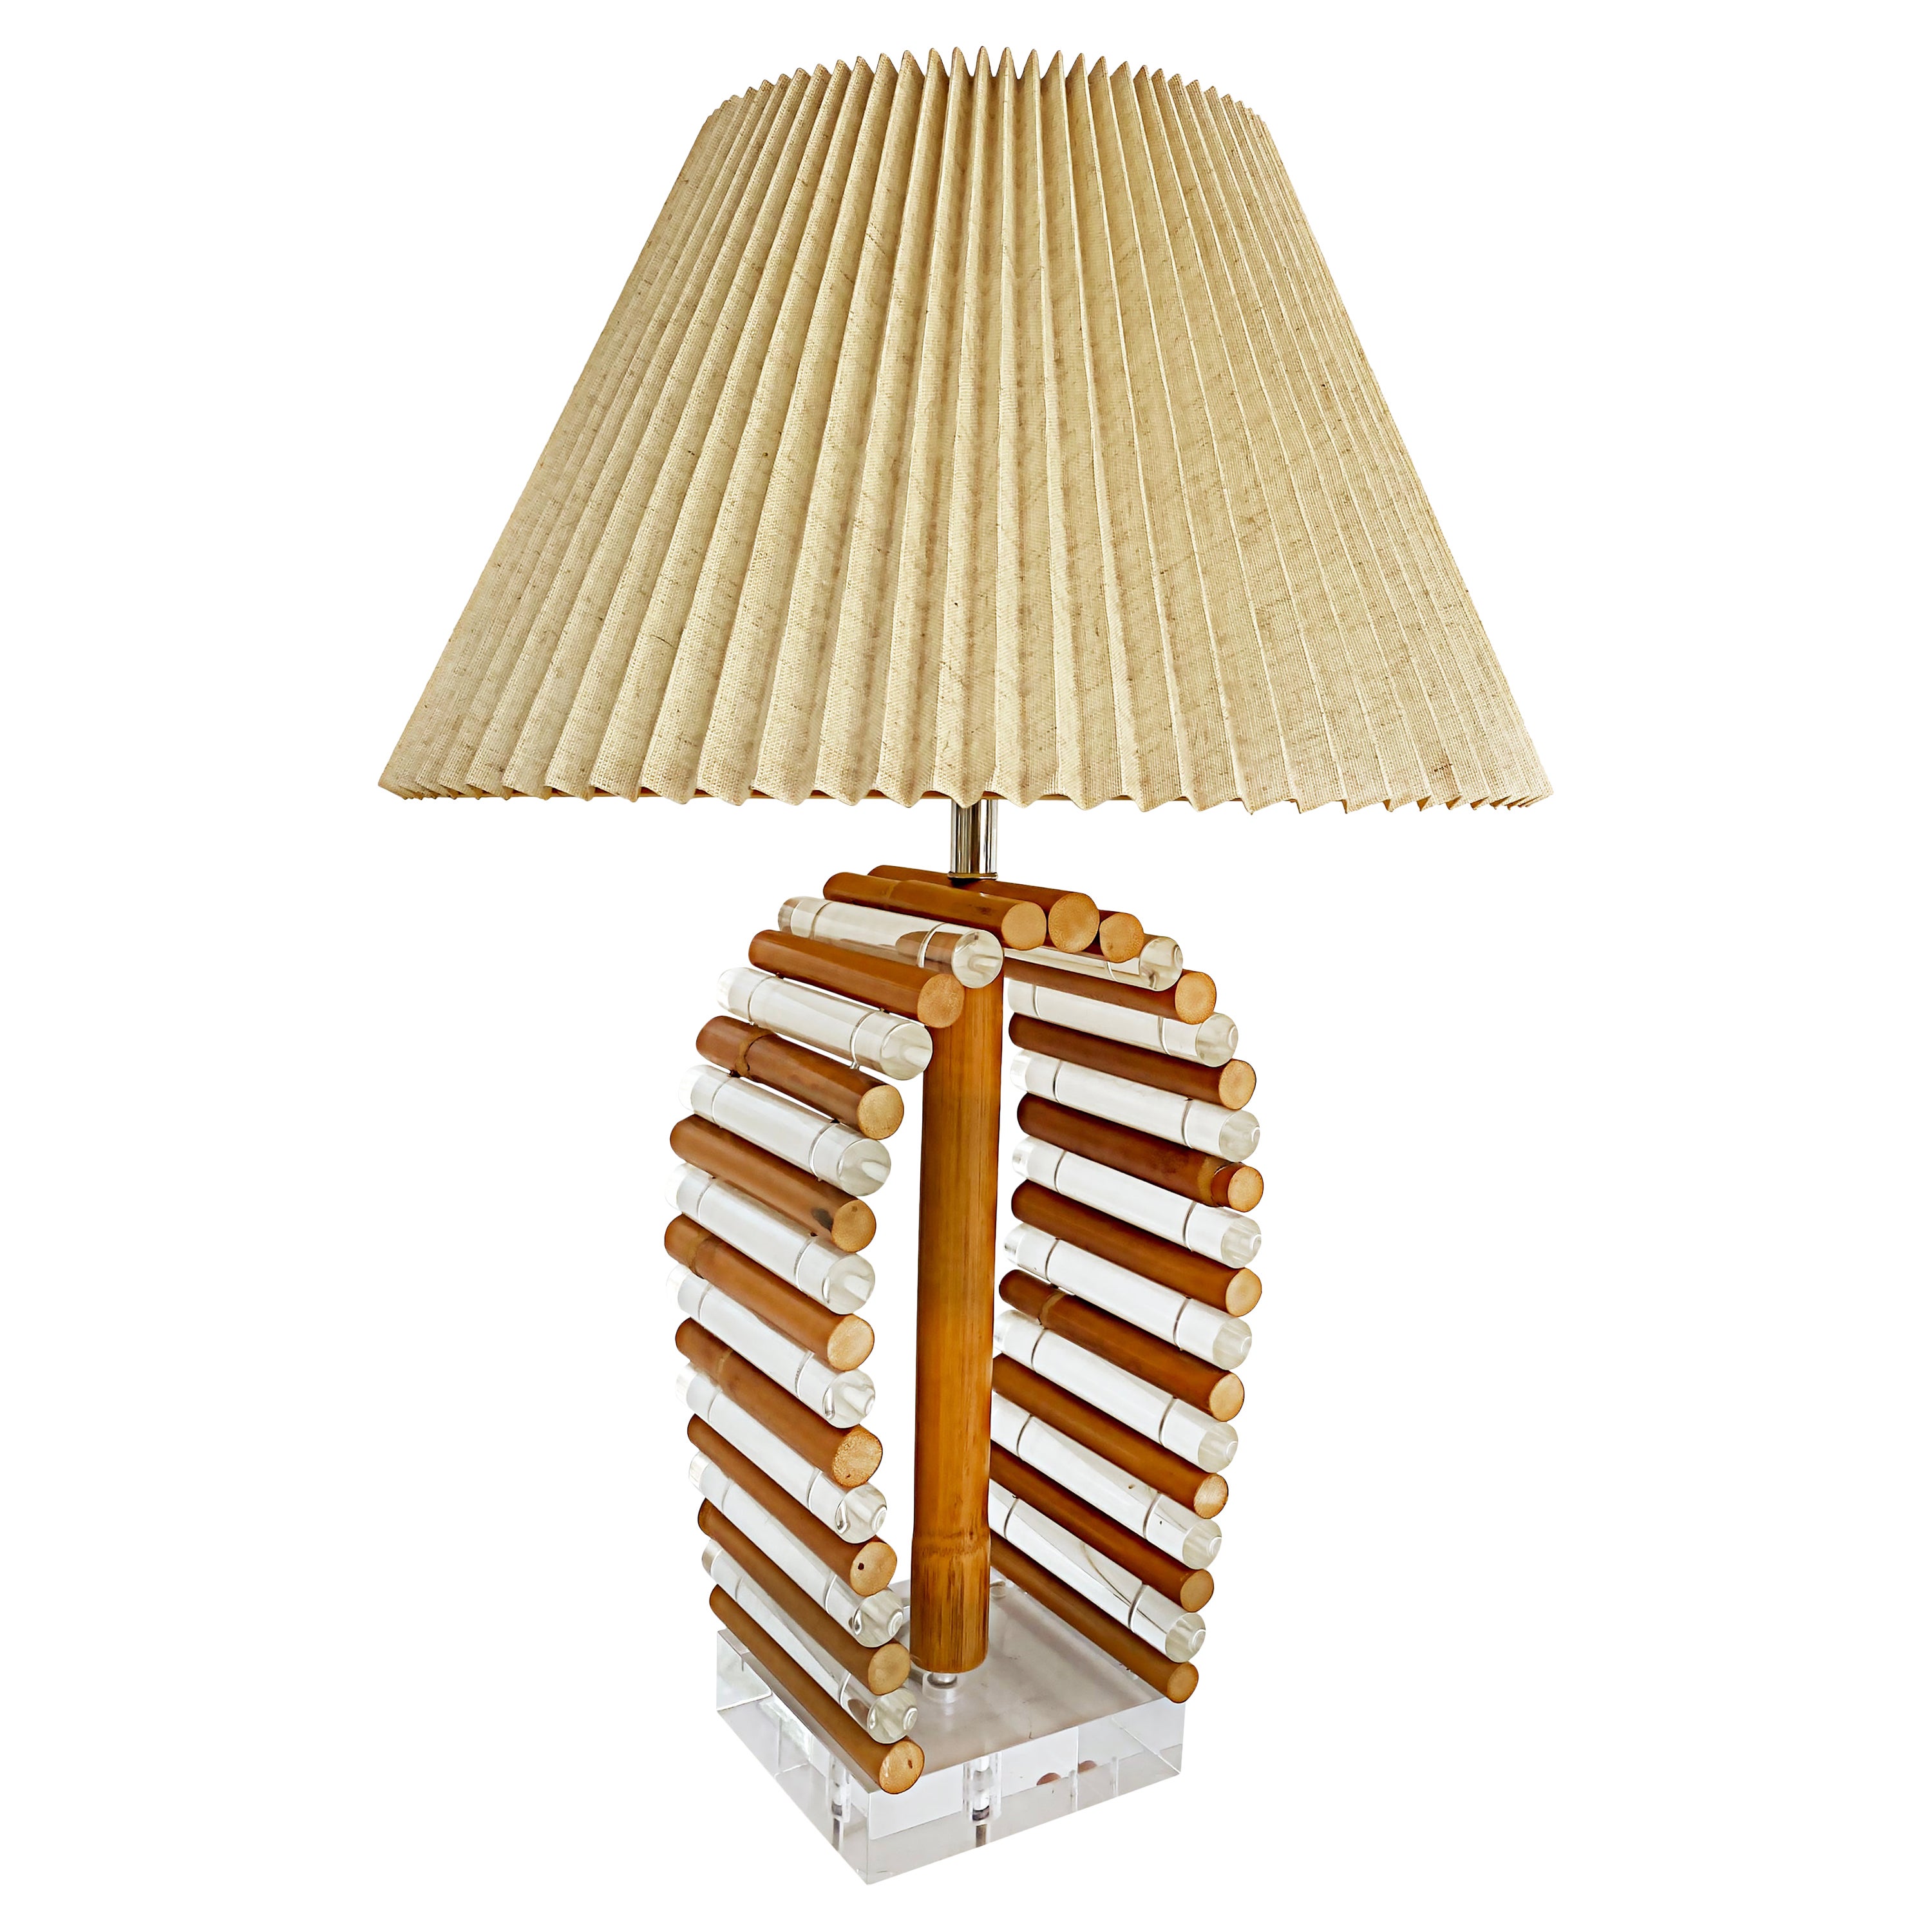 Mid-Century Modern Rattan Lucite Table Lamp with Original Finial For Sale